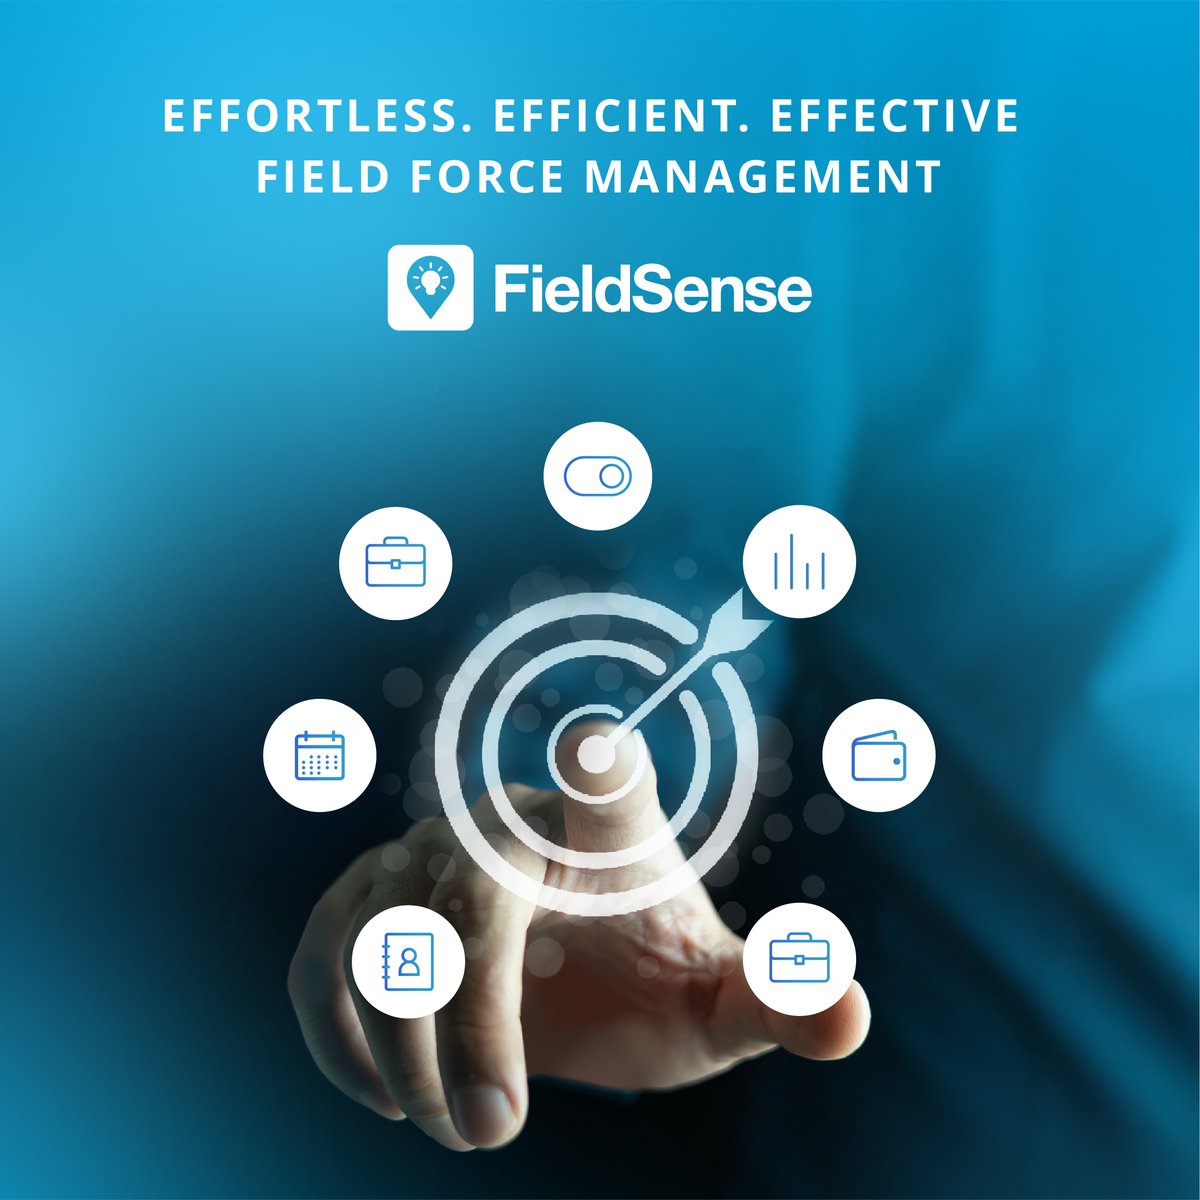 Experience the ease of field force management with a wide range of unique features in FieldSense!

To know more, visit us!
fieldsense.in

#fieldsense #fieldforcemanagement